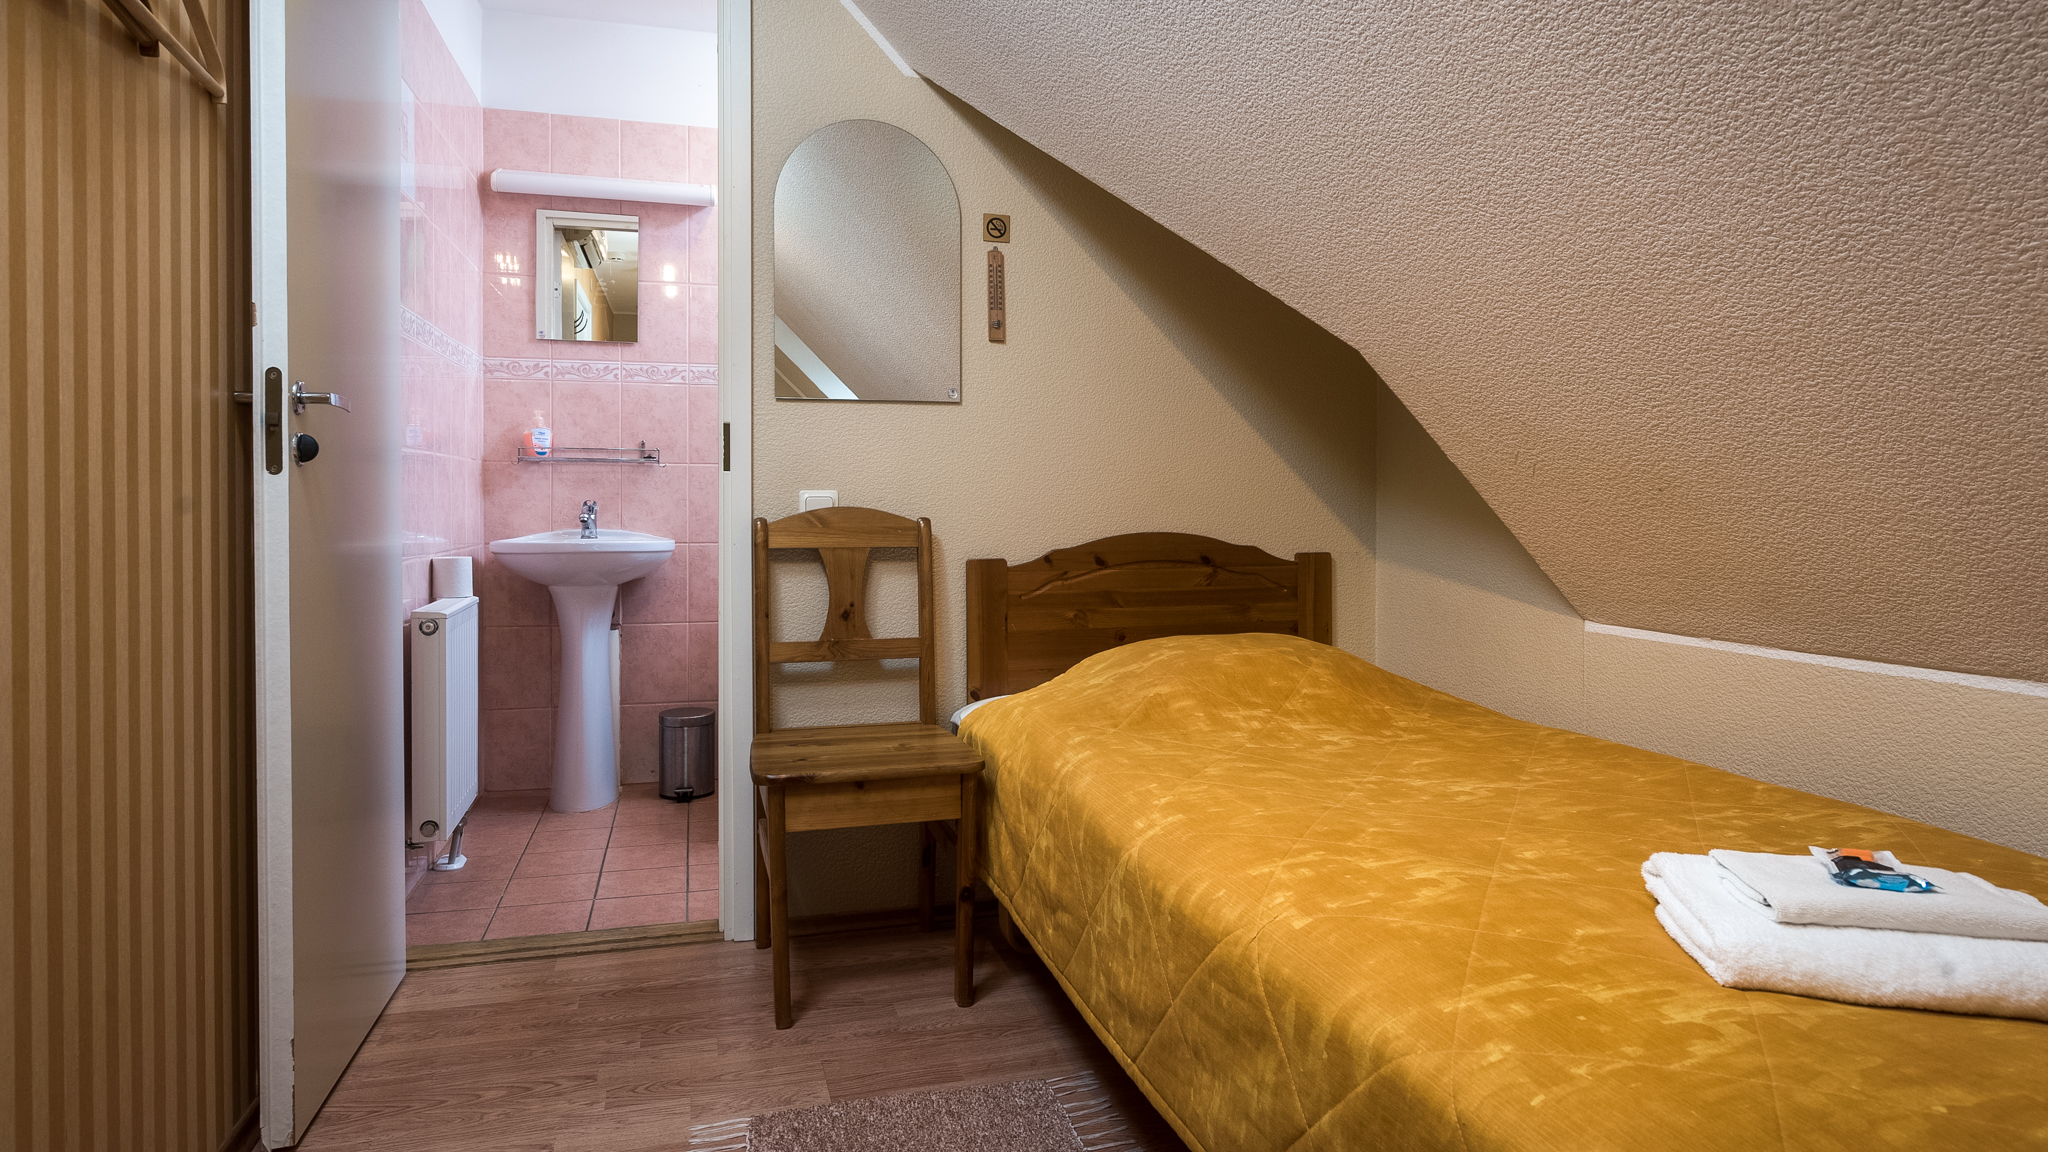 BUDGET TWIN ROOM TWO SINGLE BEDS (start from 25€/night)